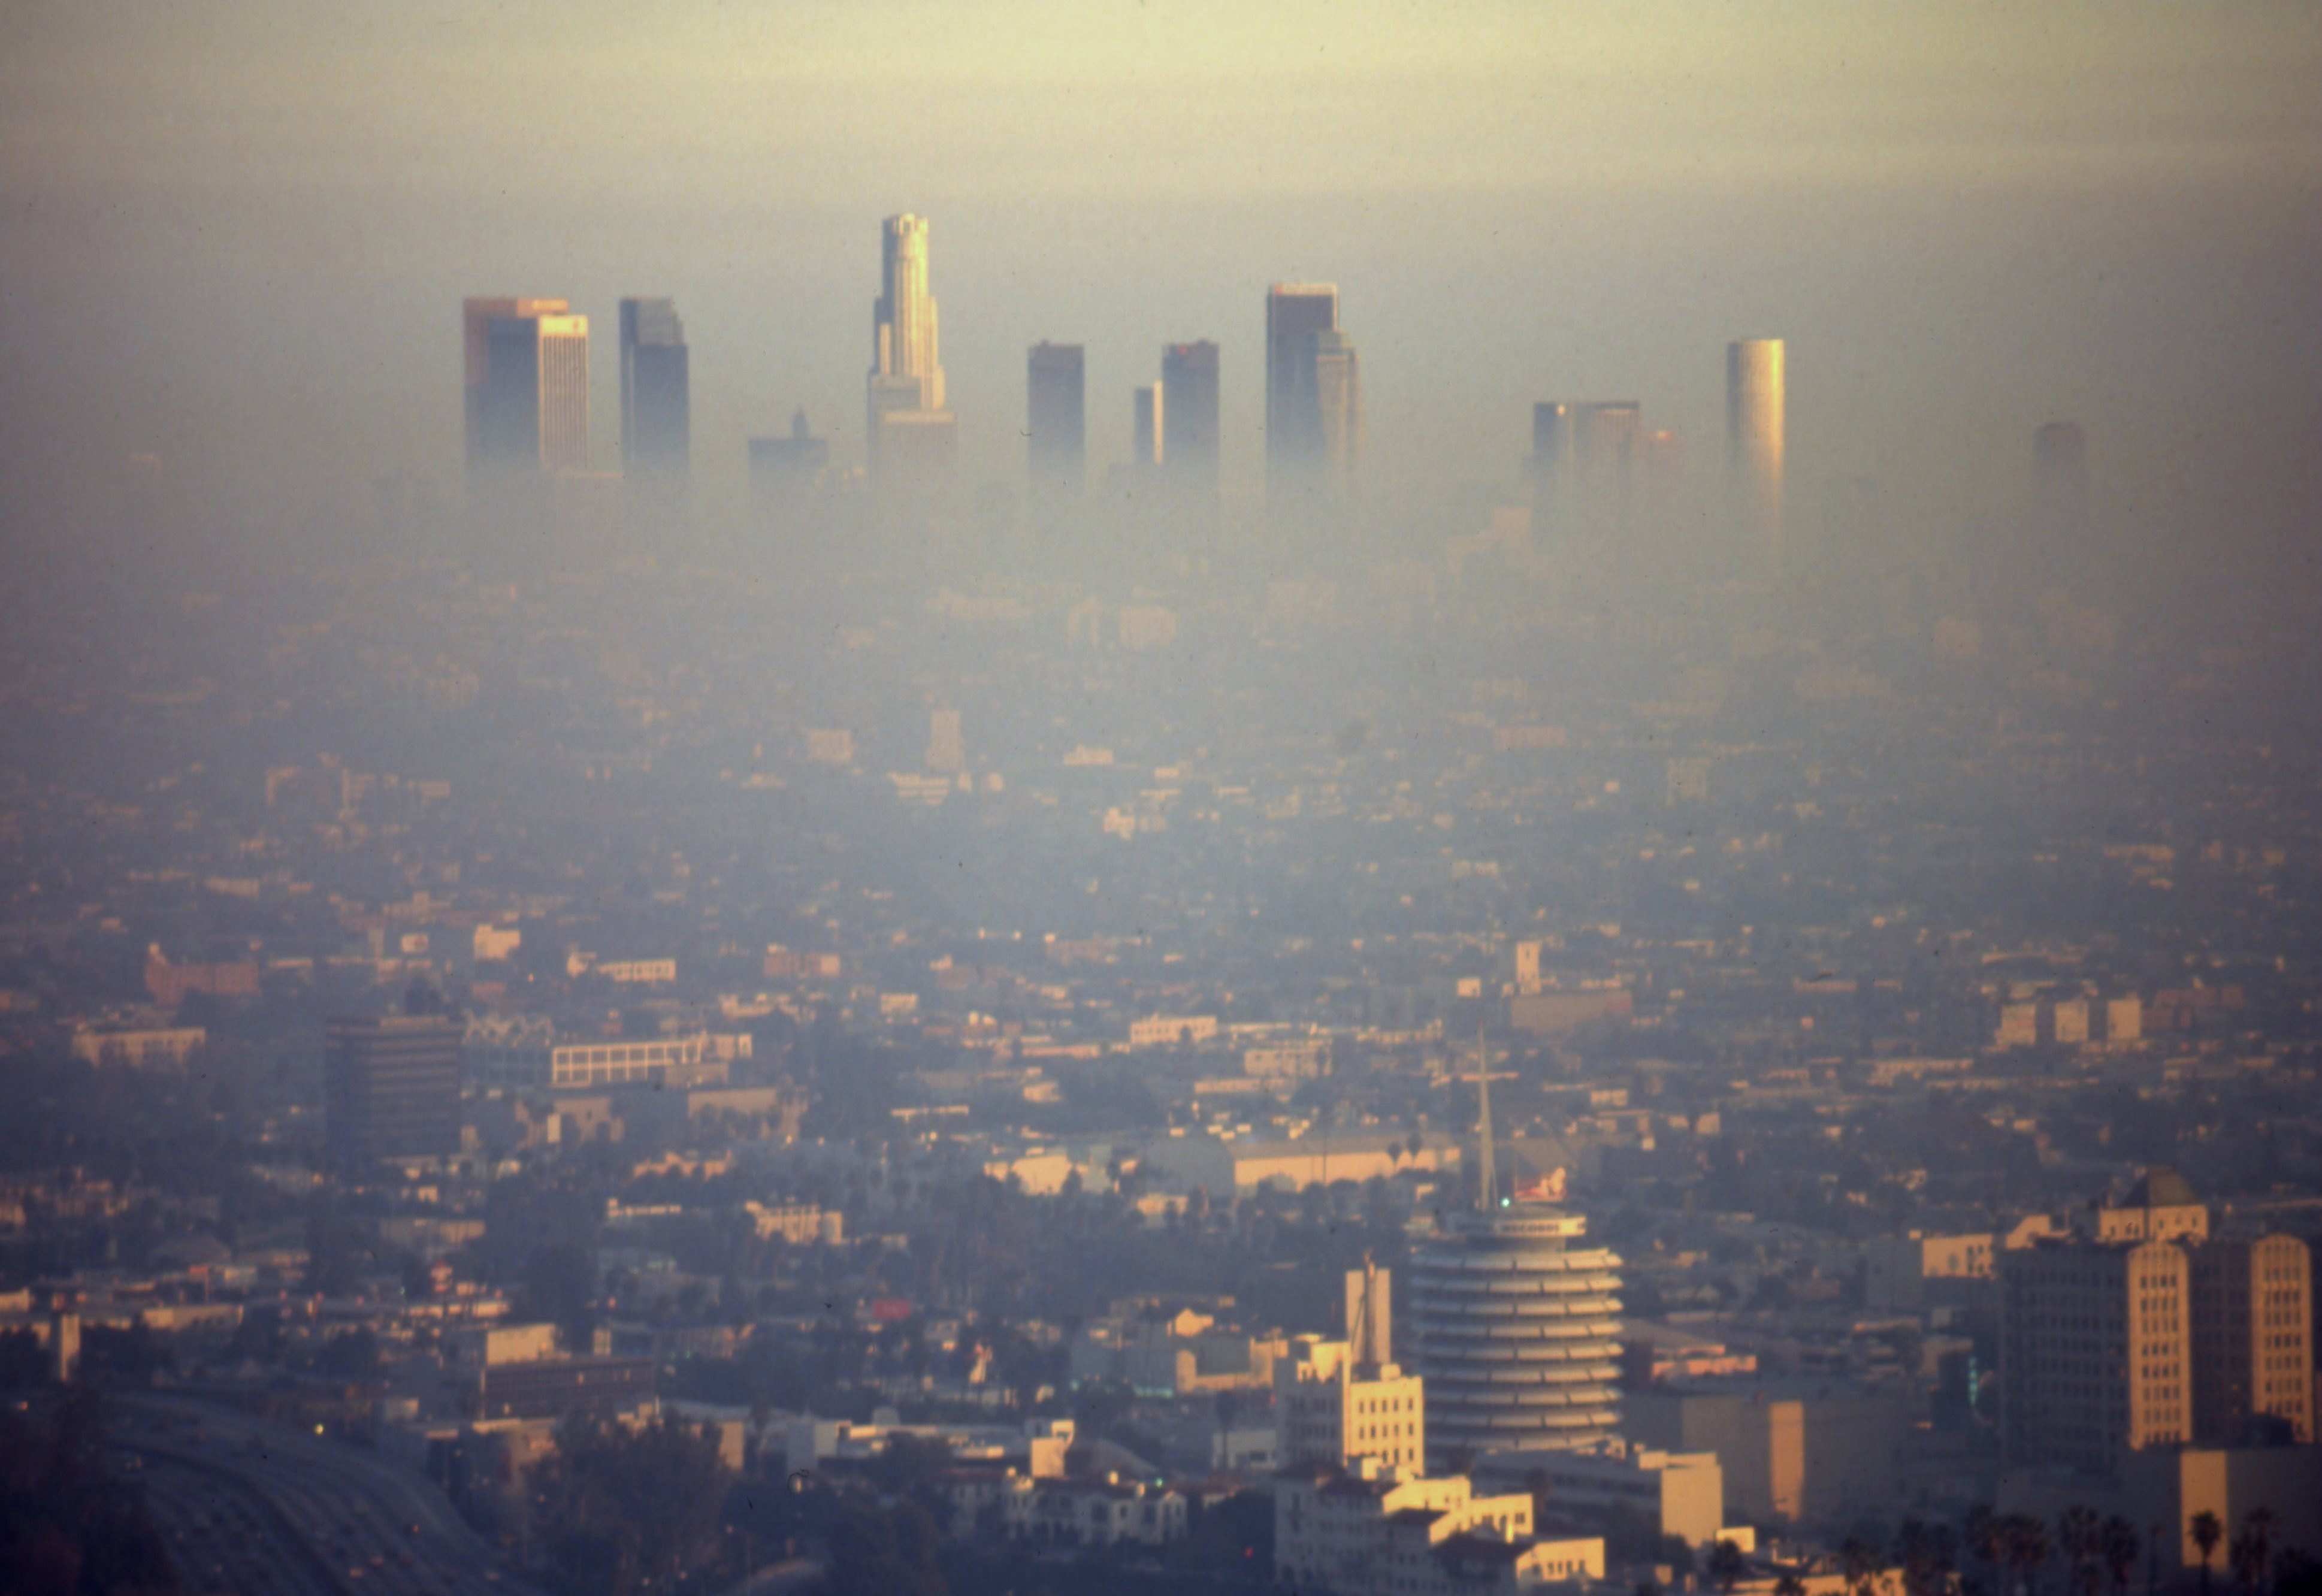 California Climate Change Policies Could Aid Public Health TIME